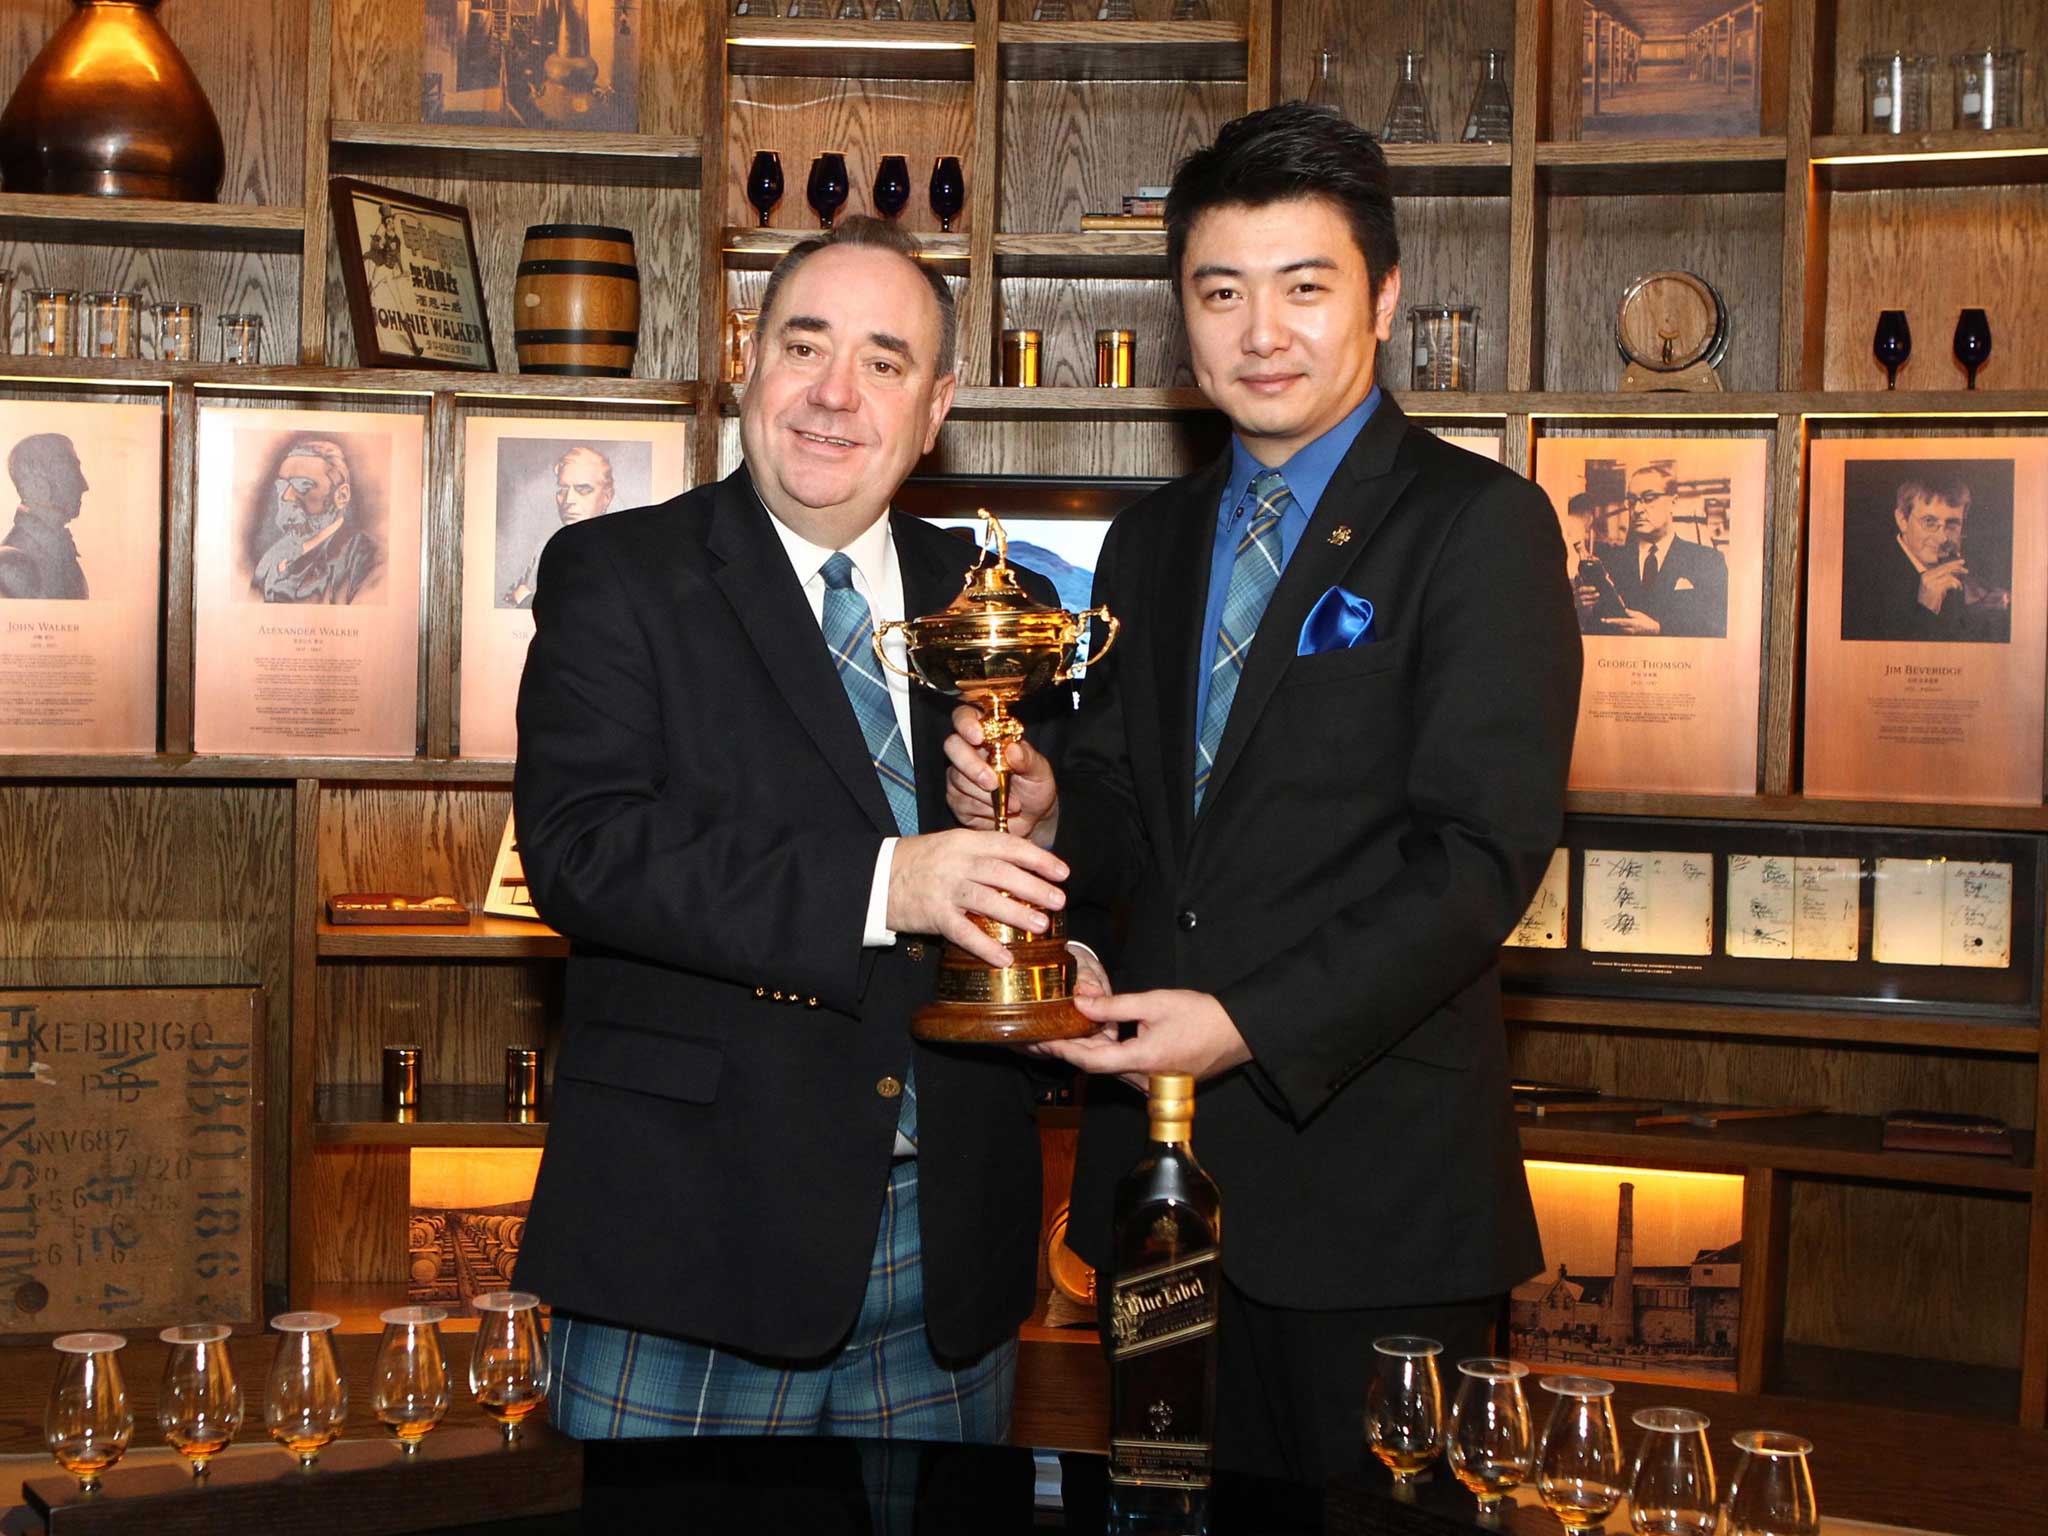 Alex Salmond and Liu Wei, Johnnie Walker Brand Ambassador for China, celebrate bringing the Ryder Cup to China